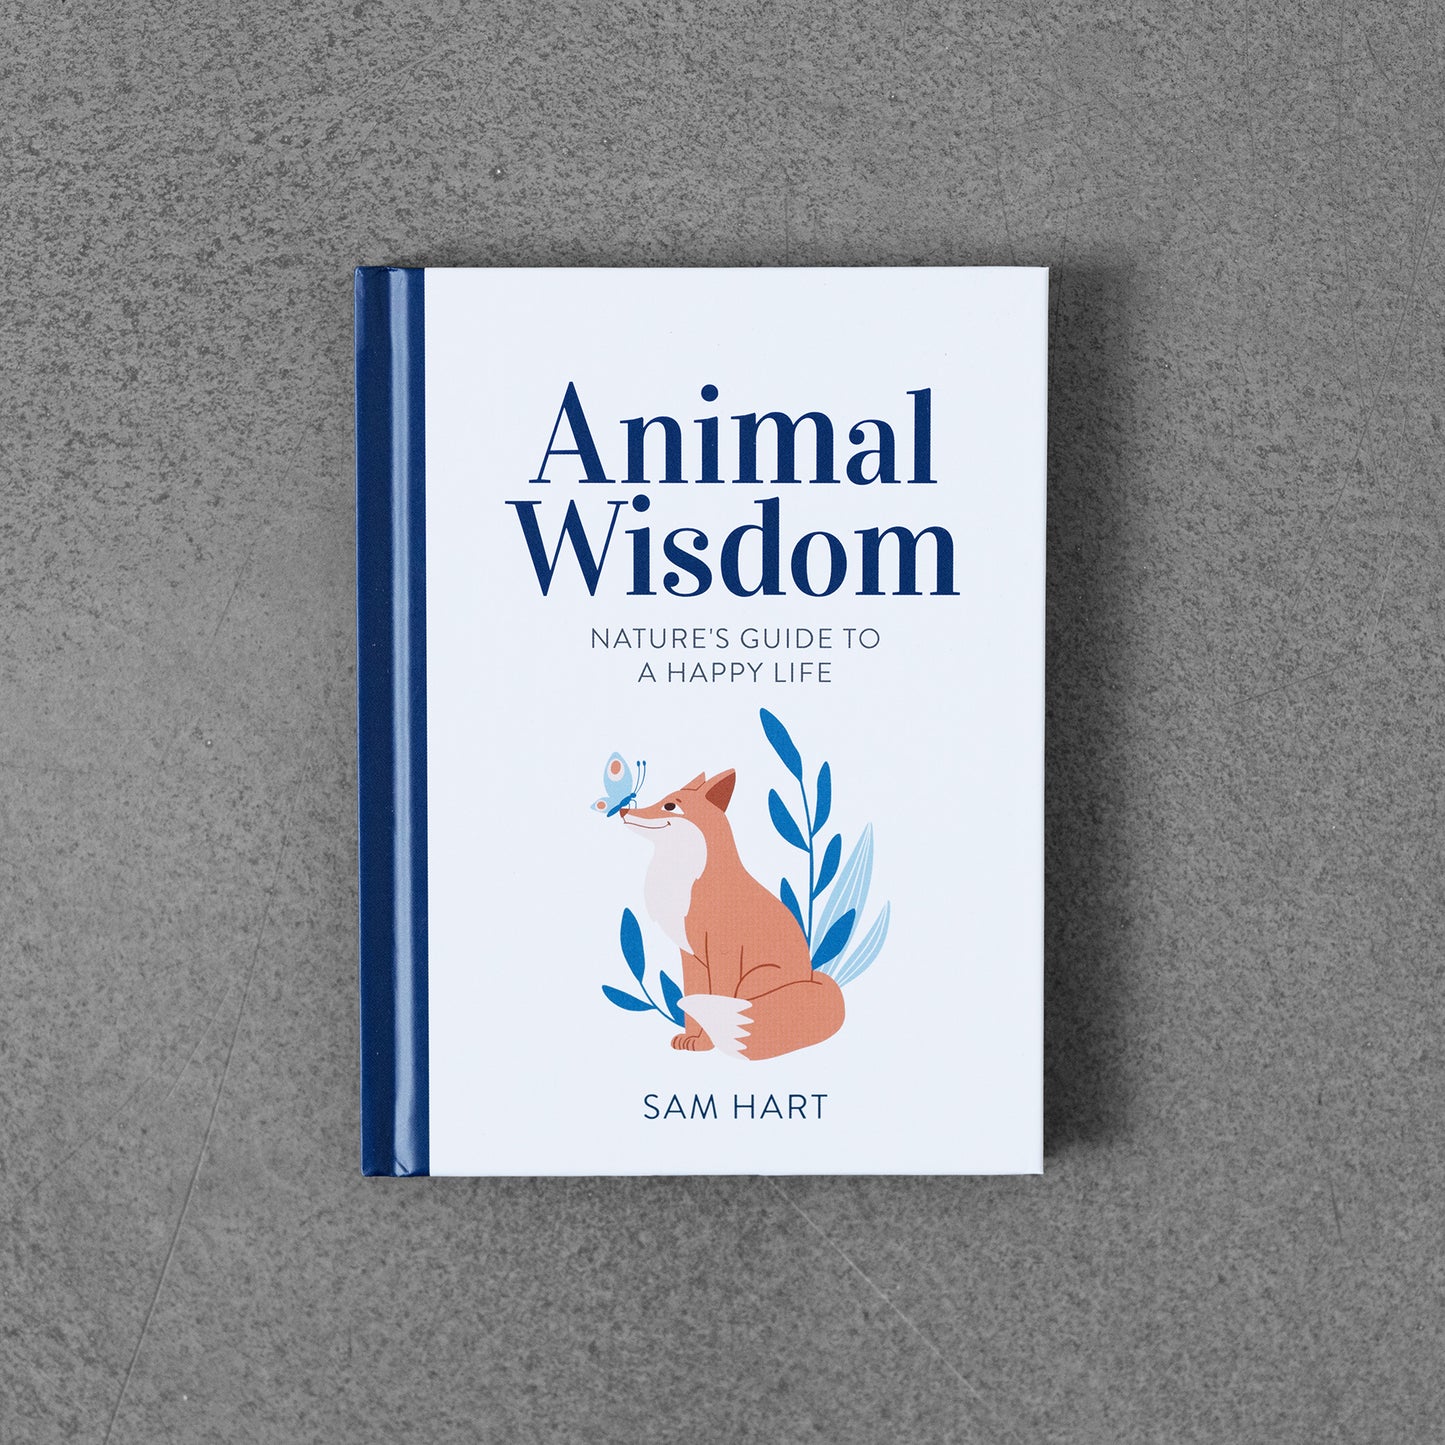 Animal Wisdom: Nature’s Guide to a Happy Life